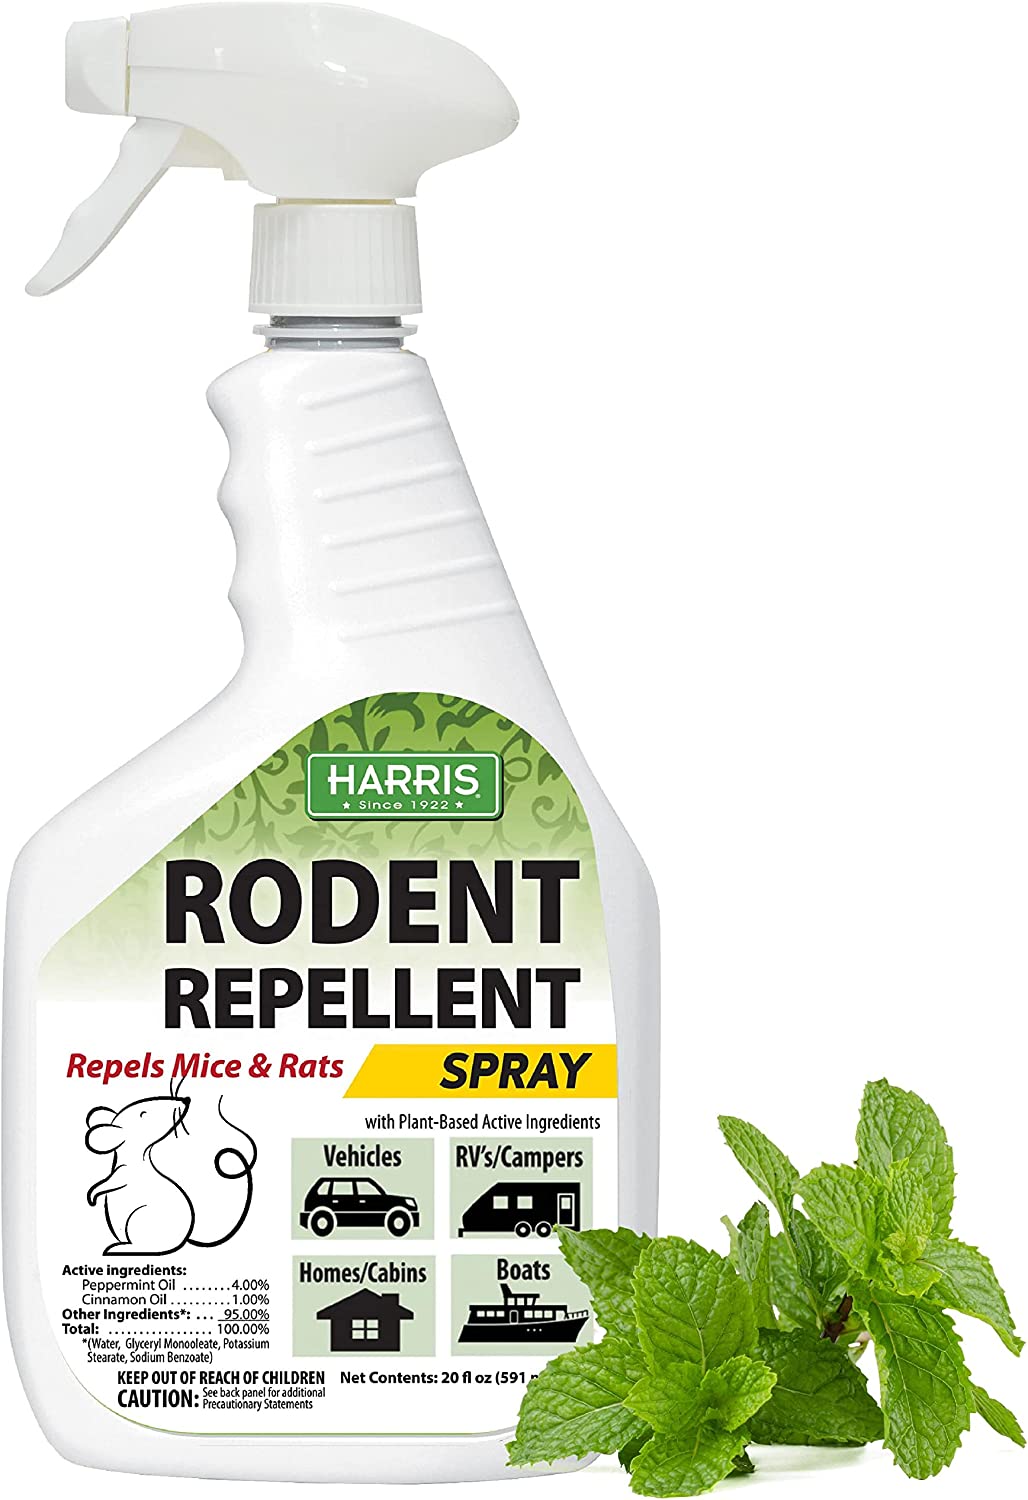 Harris Peppermint Oil Mice & Rodent Repellent Spray [...]